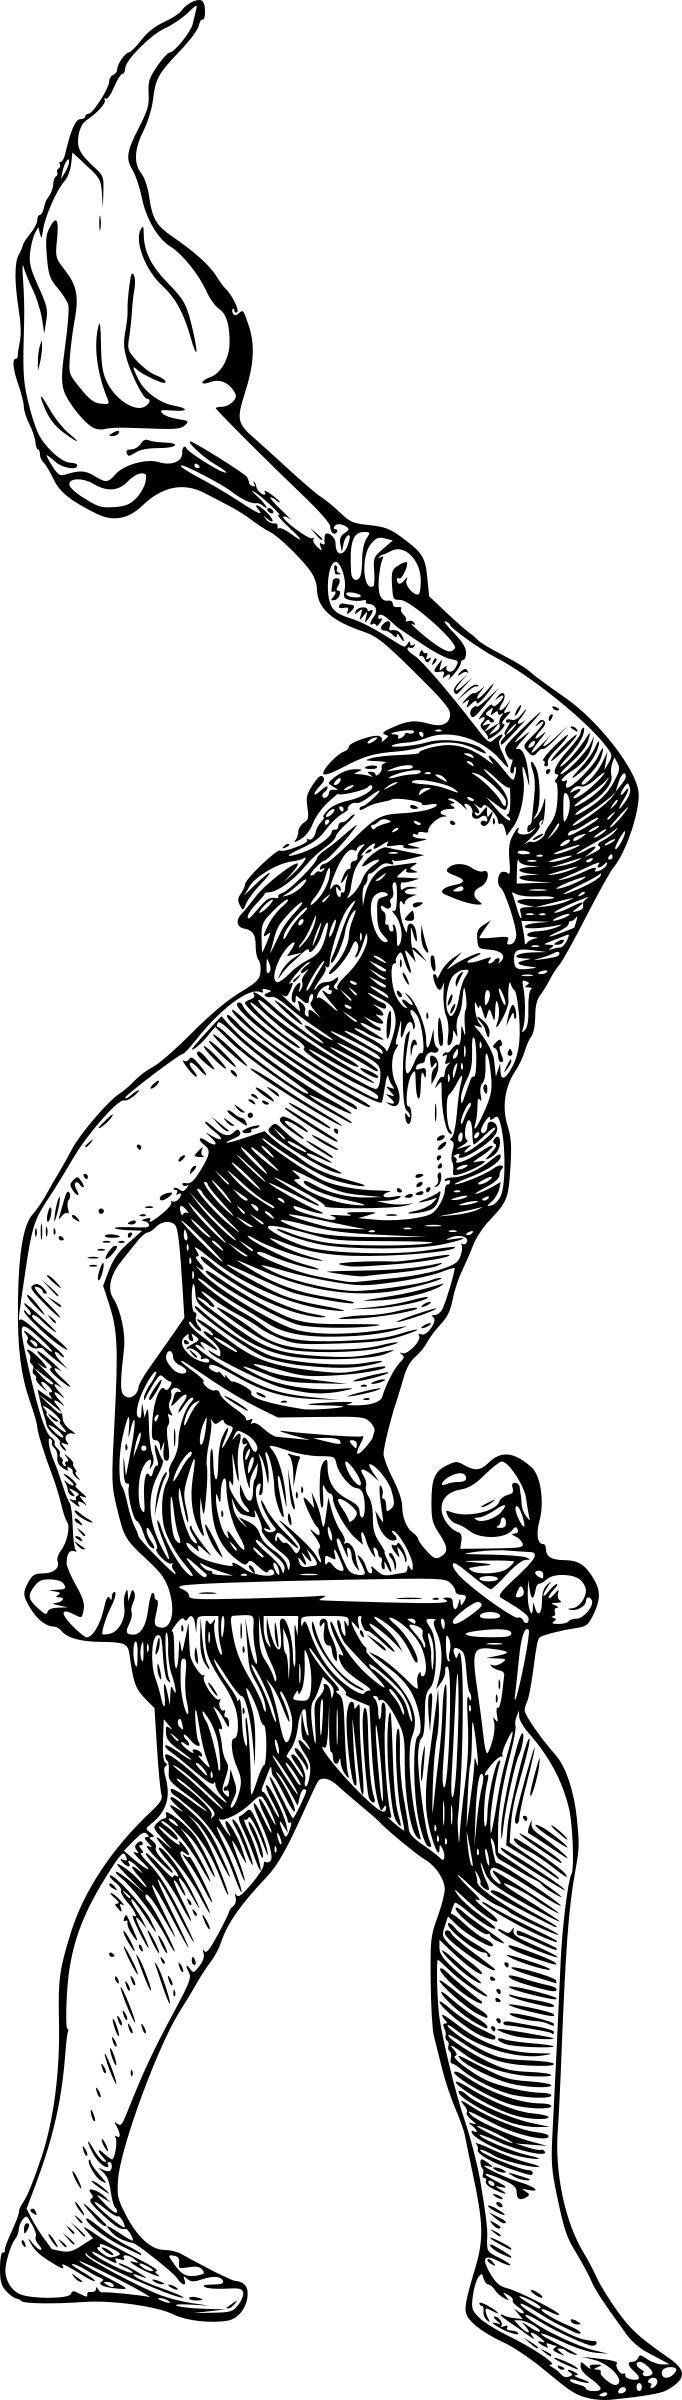 Caveman with Axe and Torch png transparent